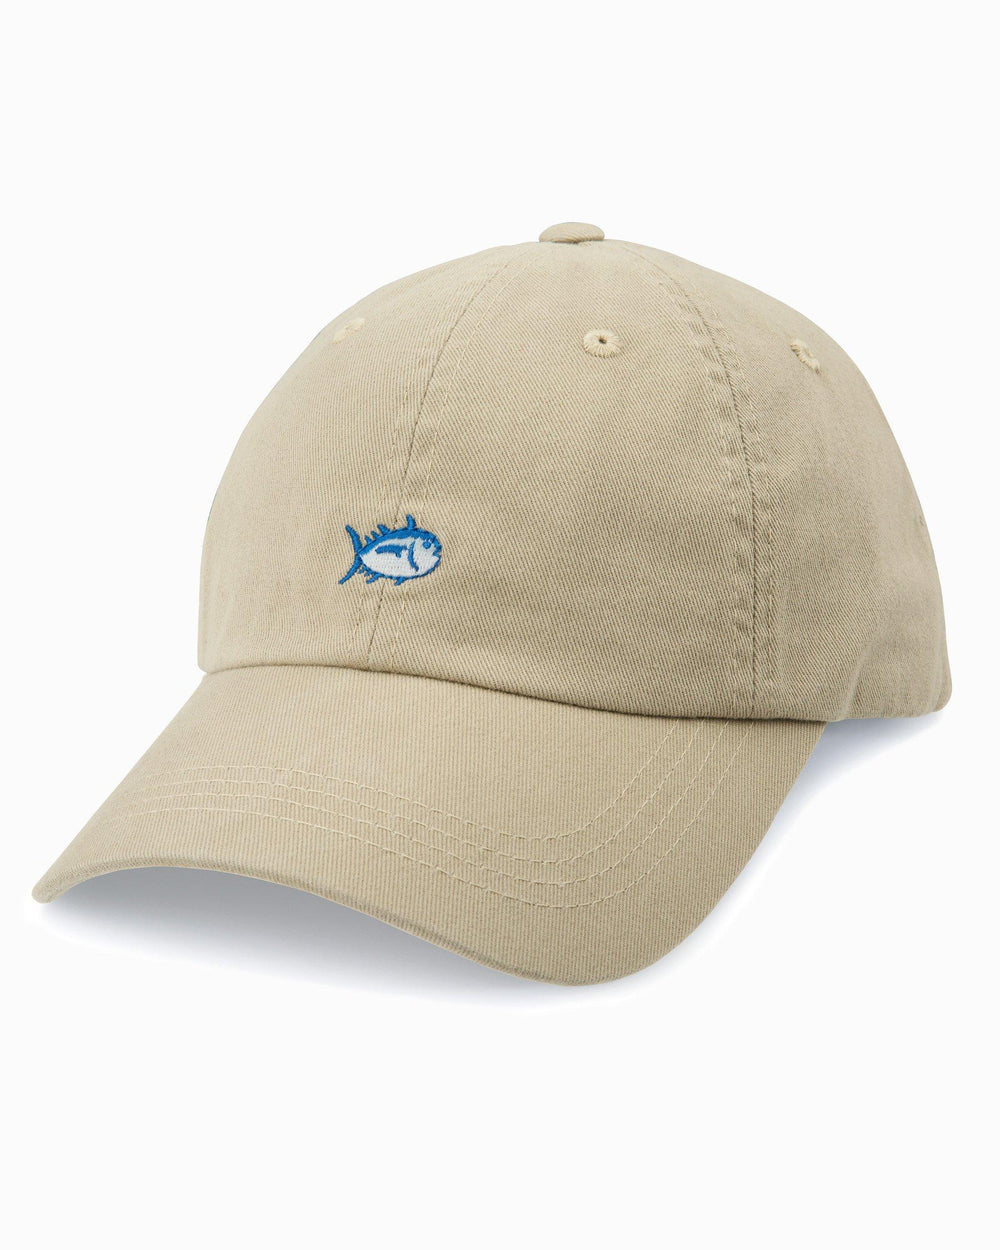 The front of the Skipjack Hat by Southern Tide - Khaki